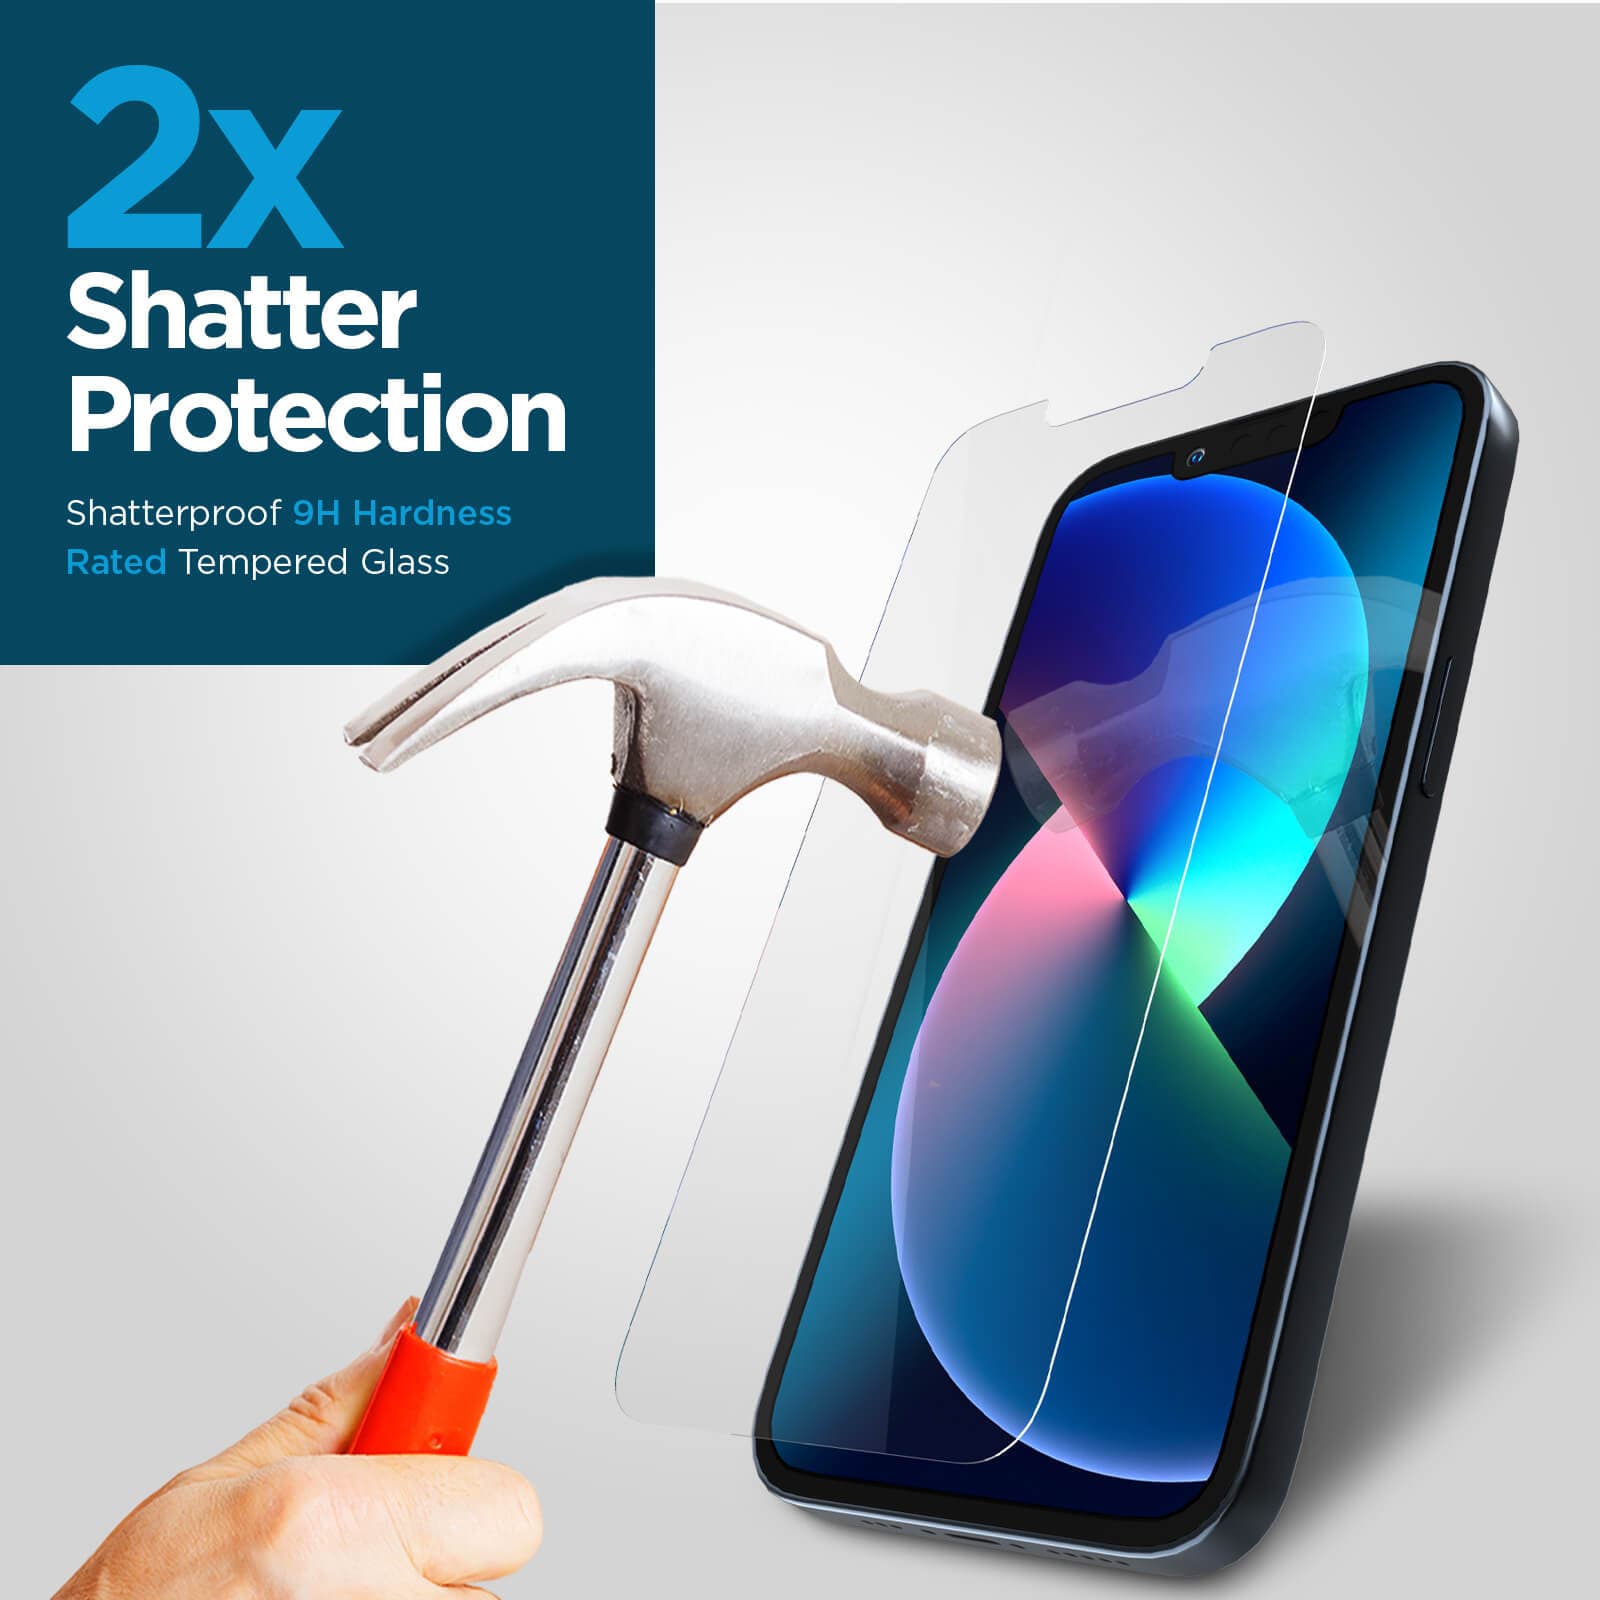 2x shatter protection. Shatterproof 9H Hardness rated tempered glass. color::Clear